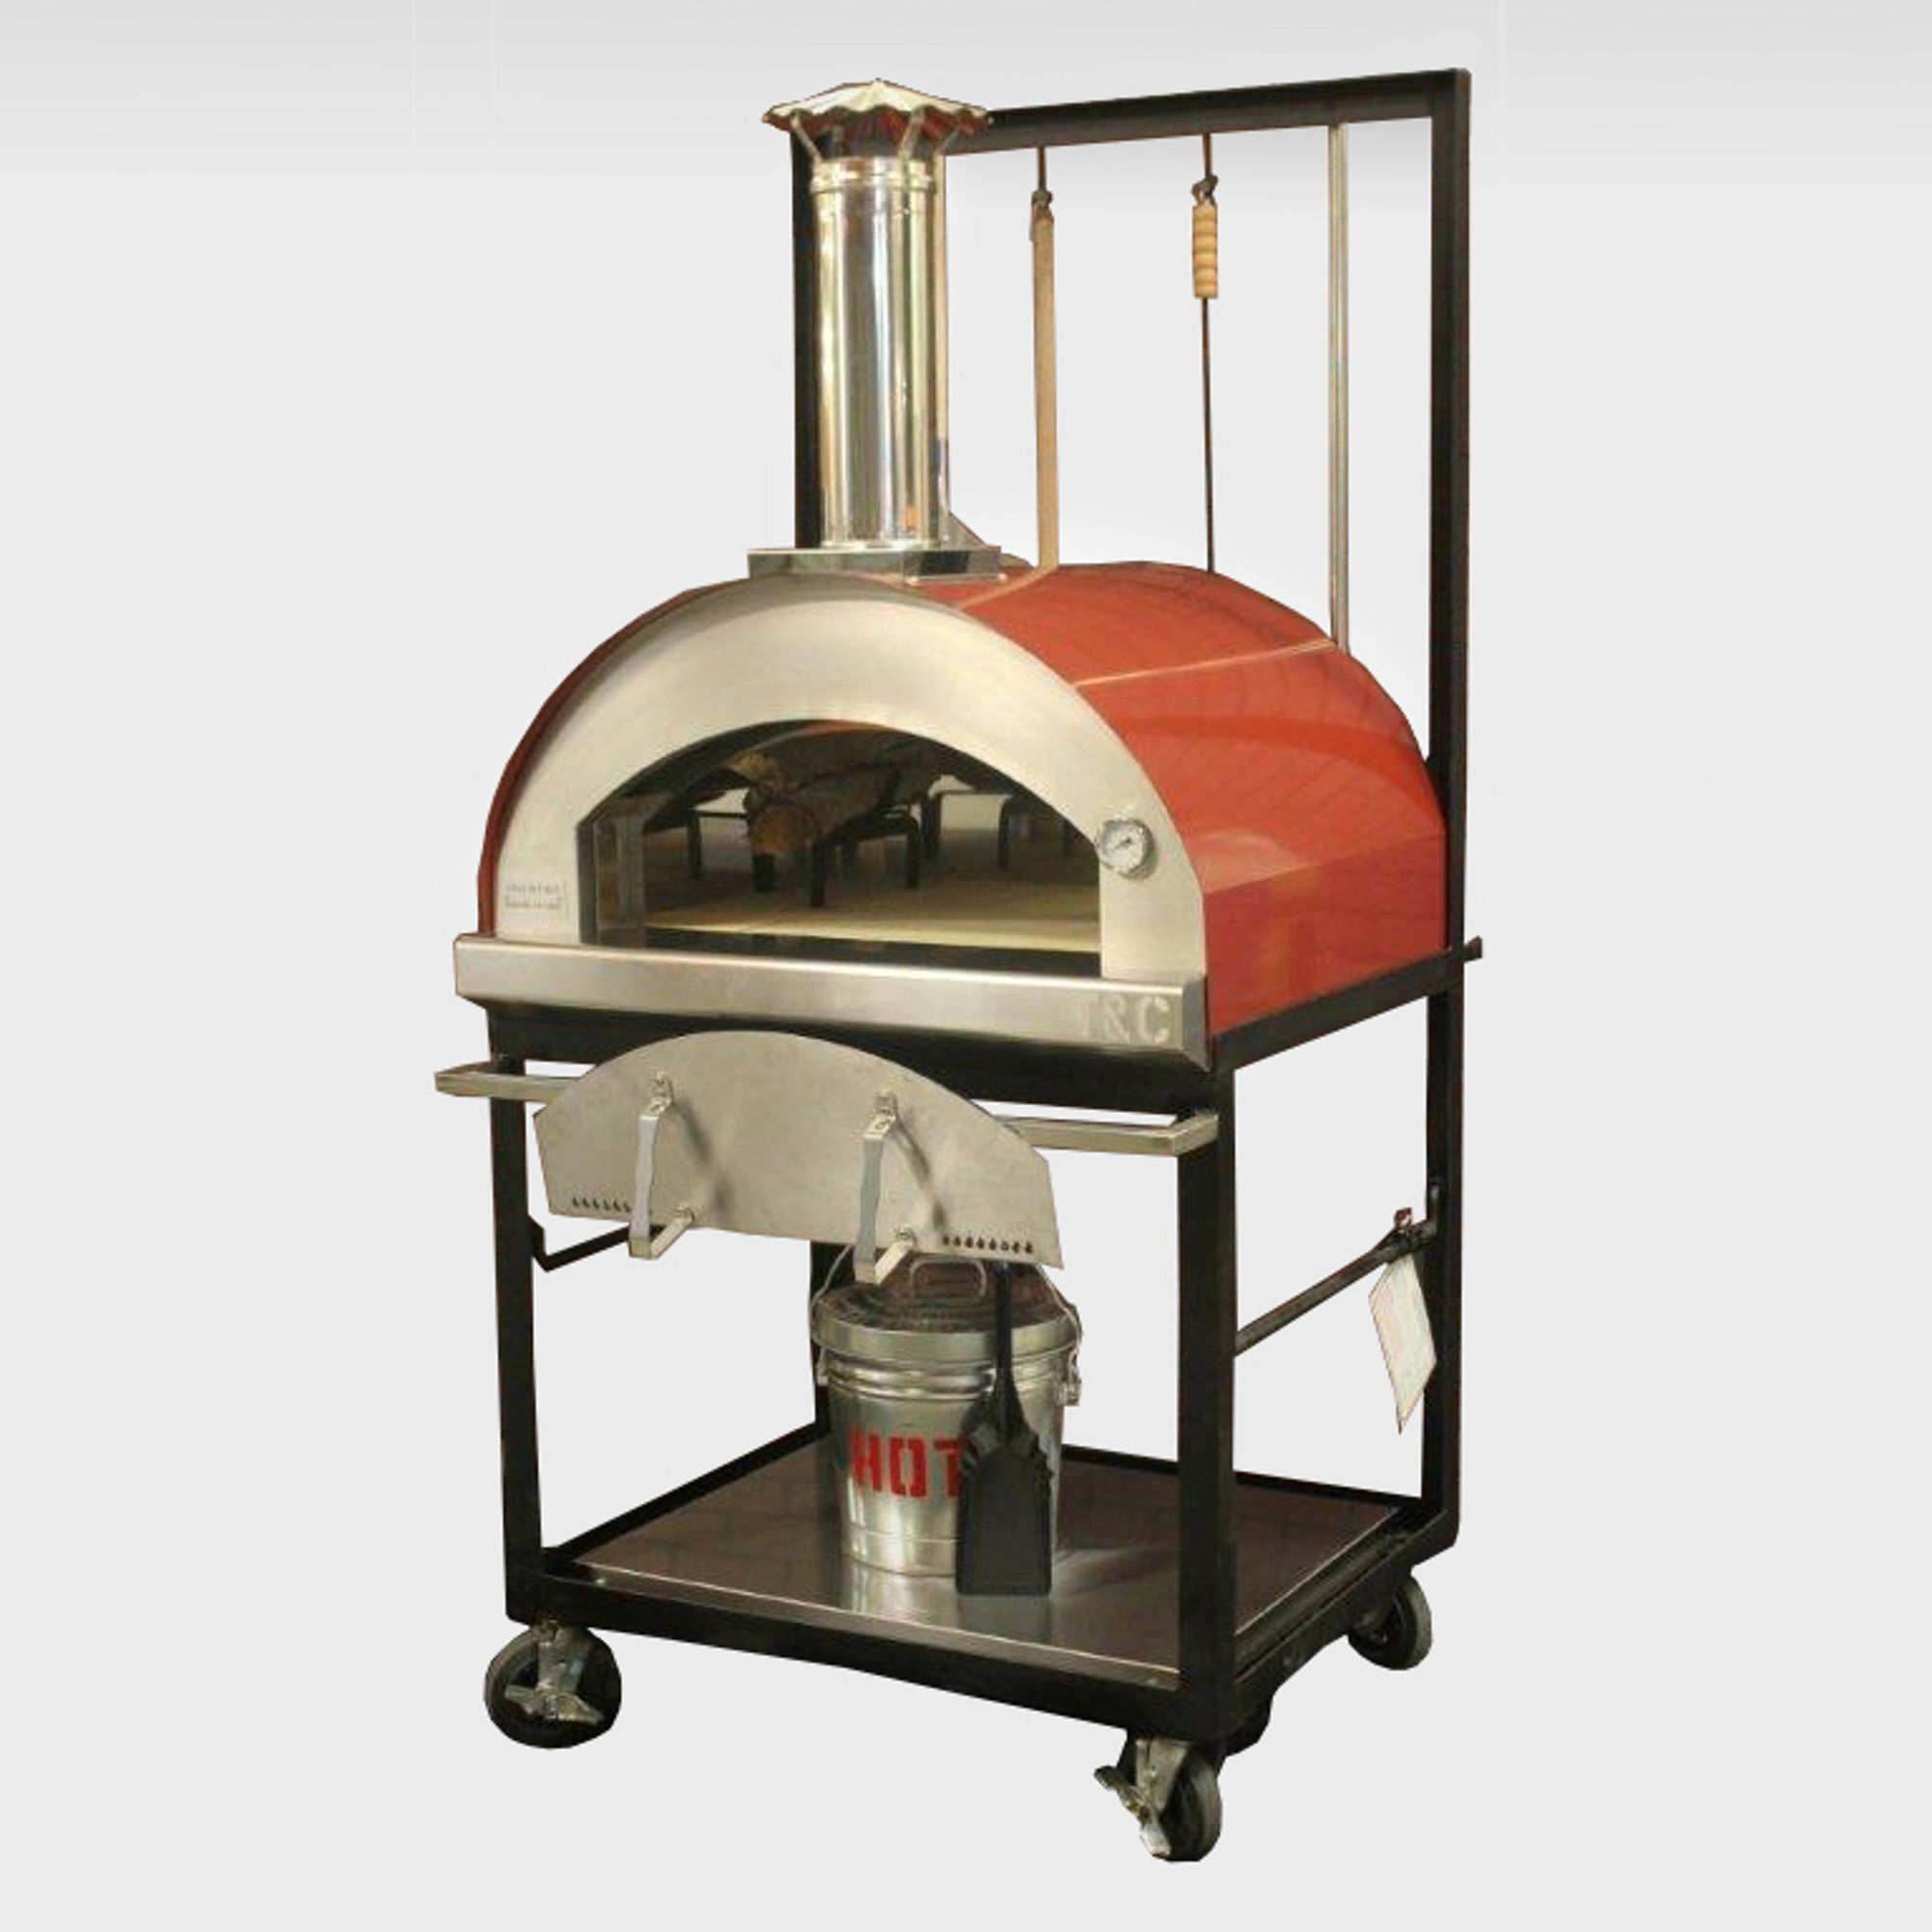 Gran Forno Wood Burning Pizza Oven